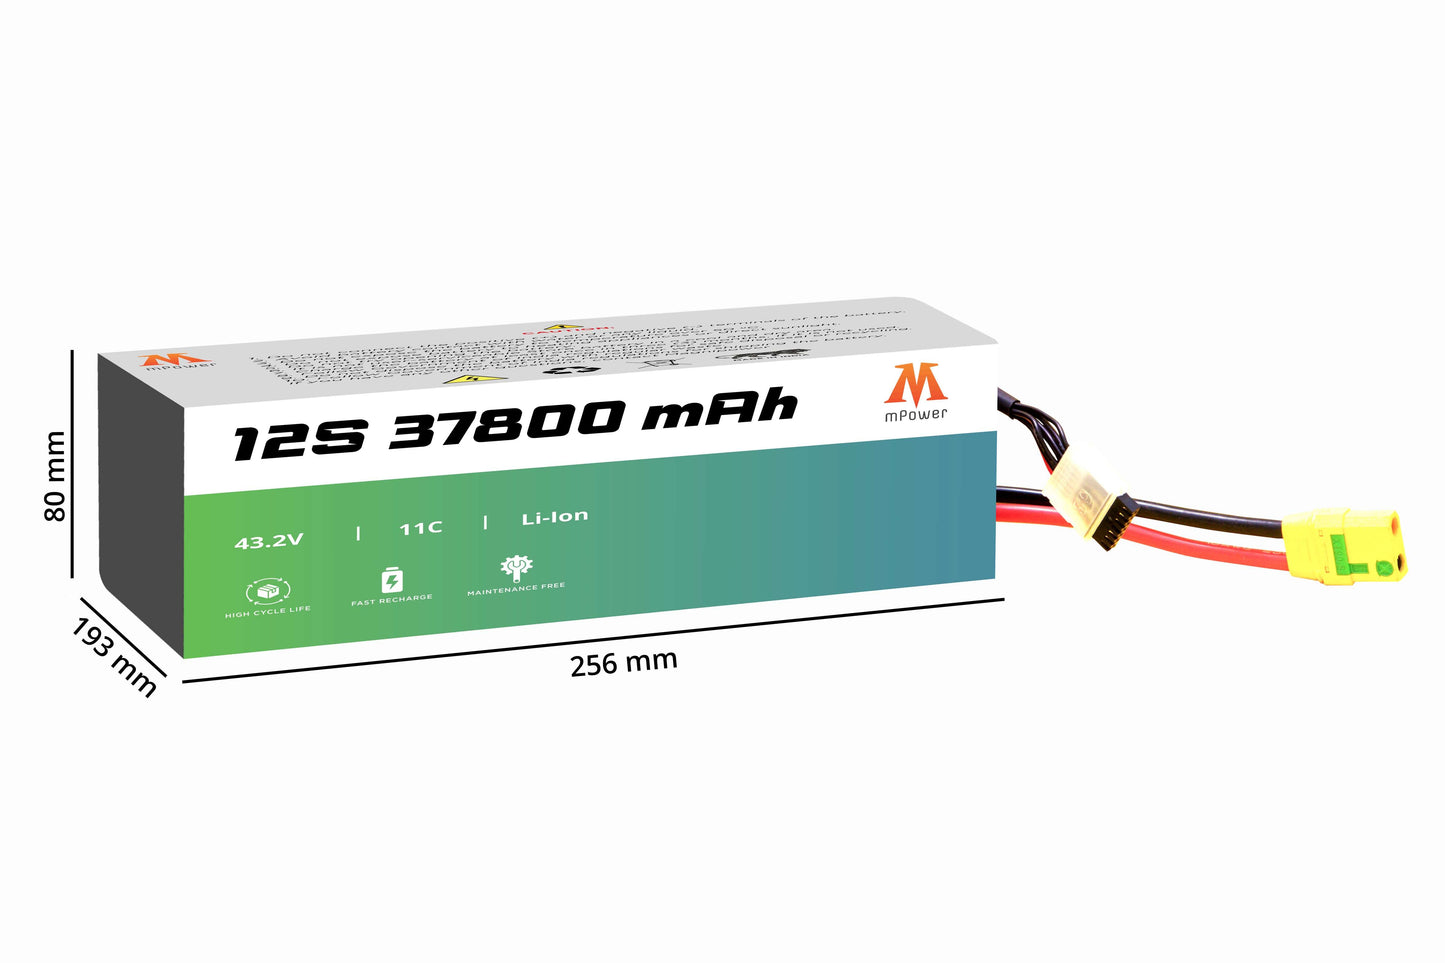 mPower 12S 37800mAh Lithium-Ion Battery for Delivery Drones